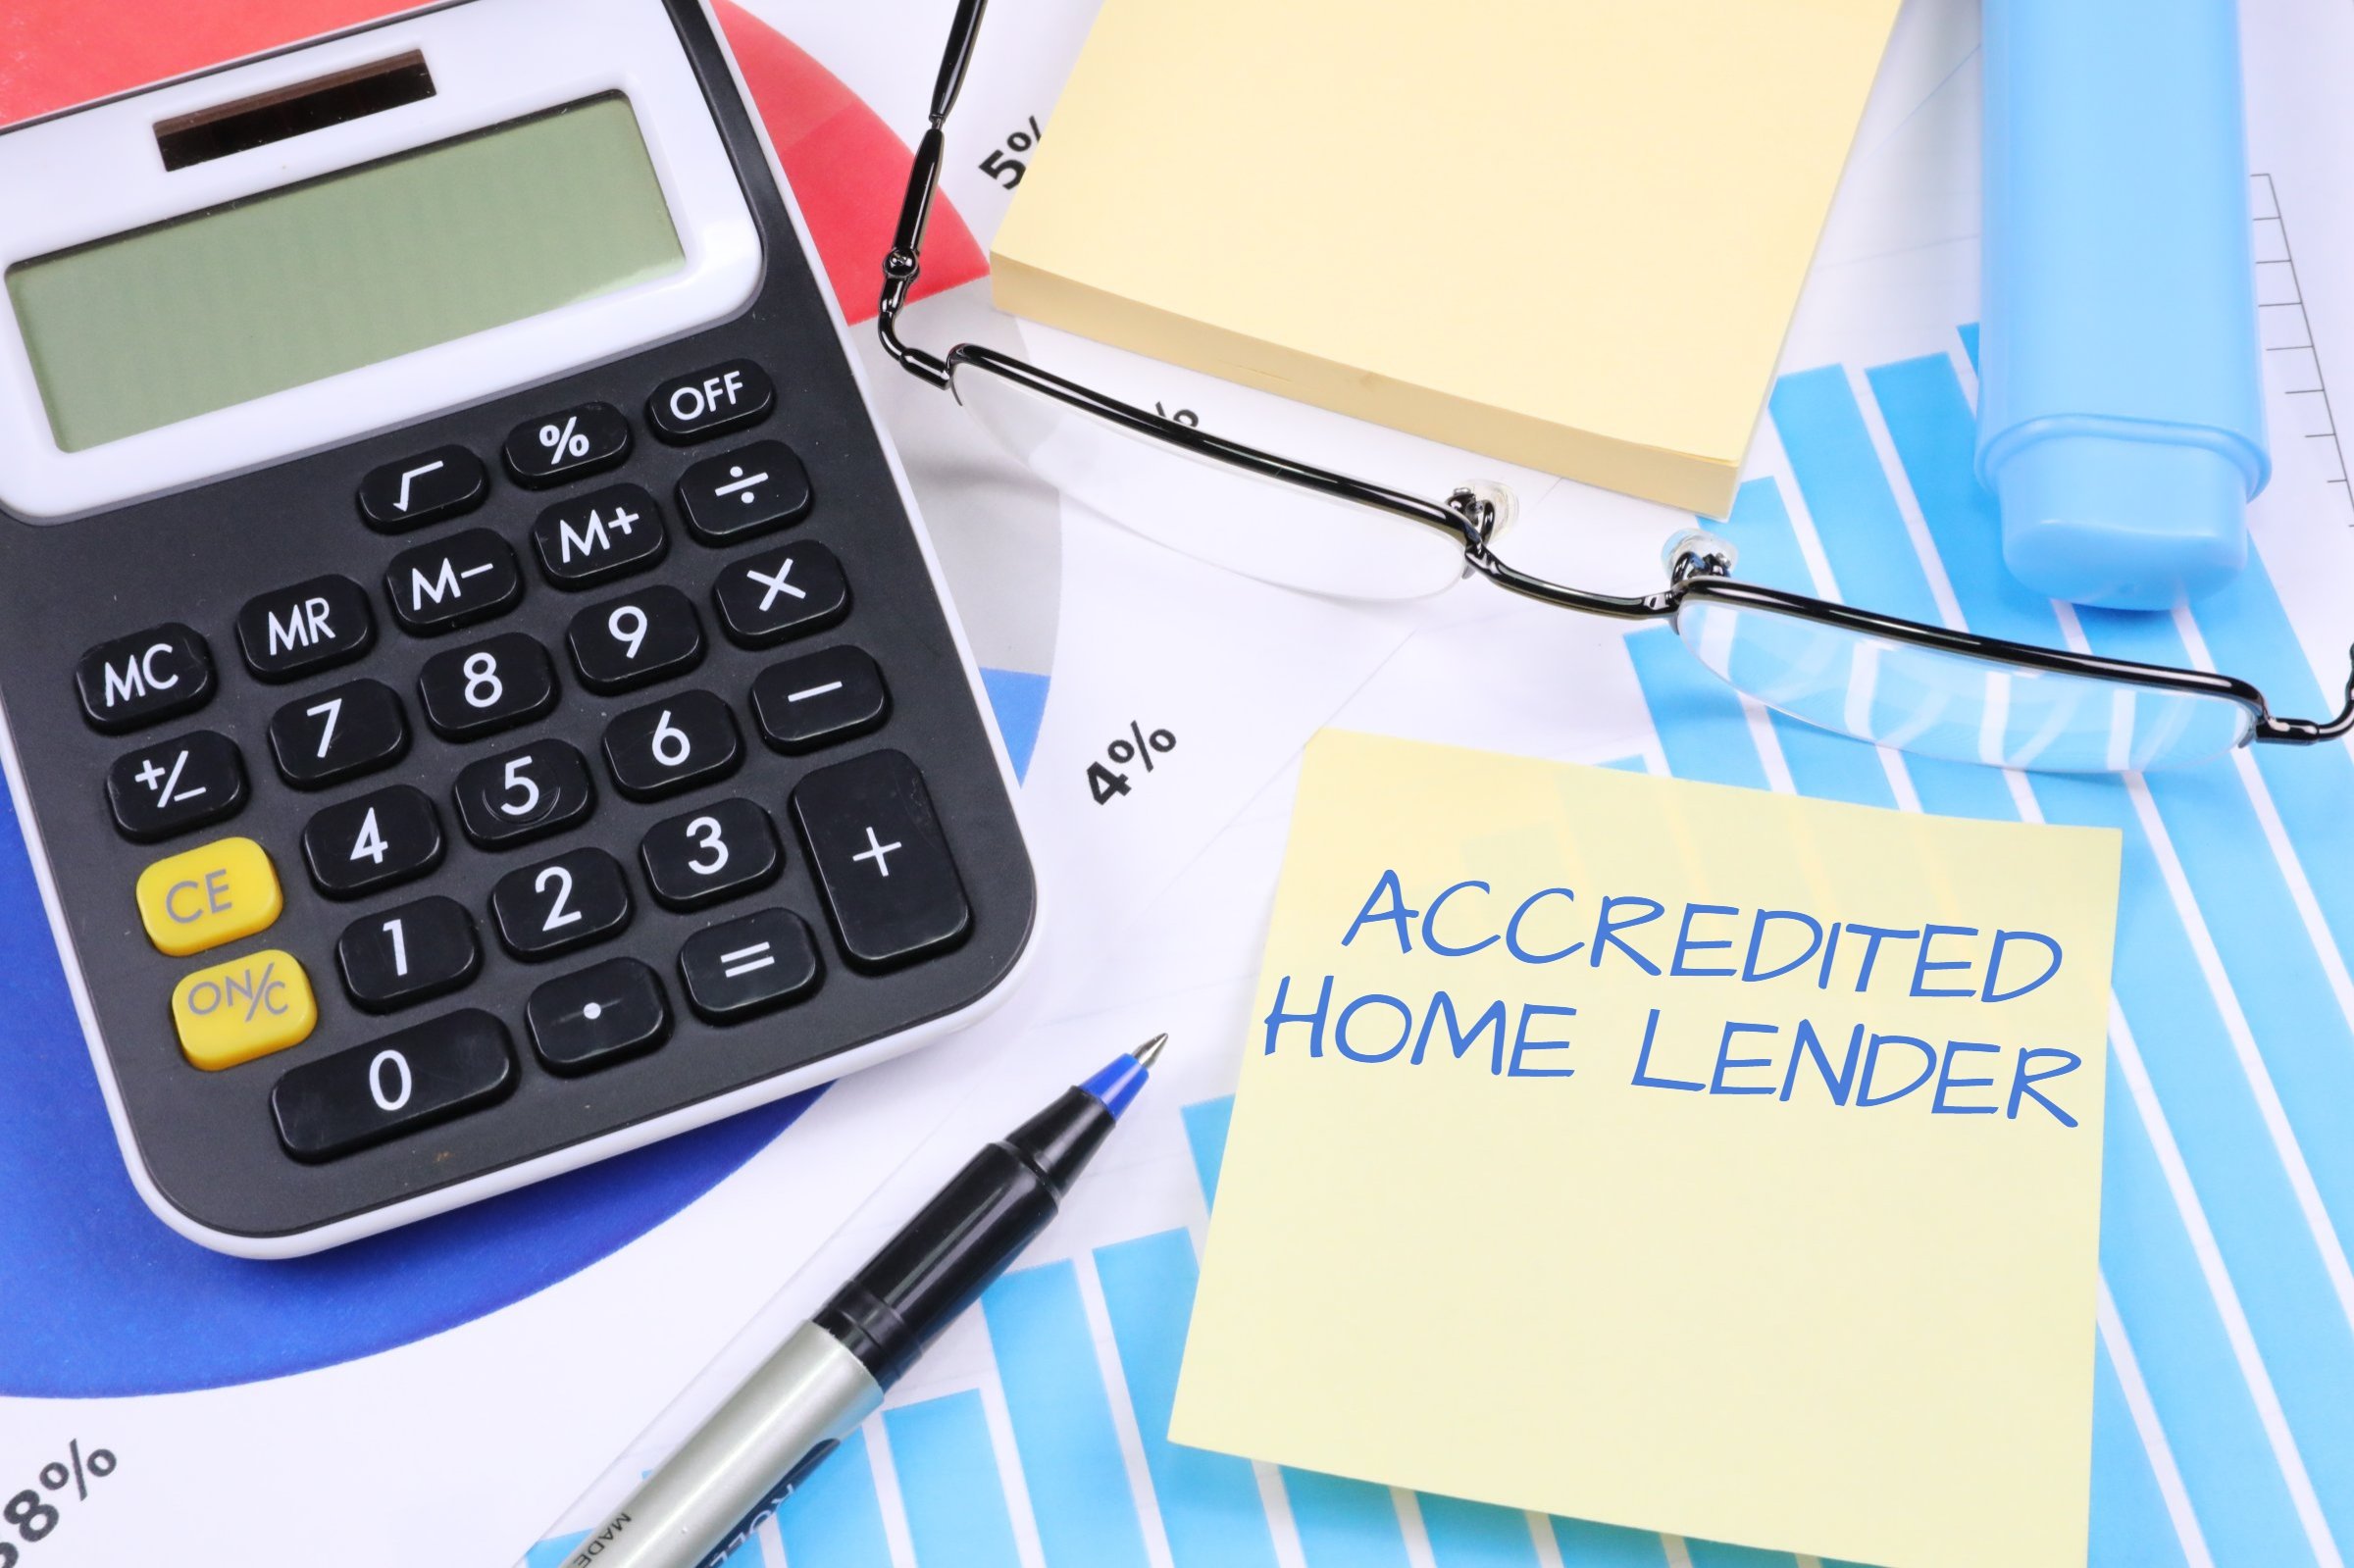 Accredited Home Lender